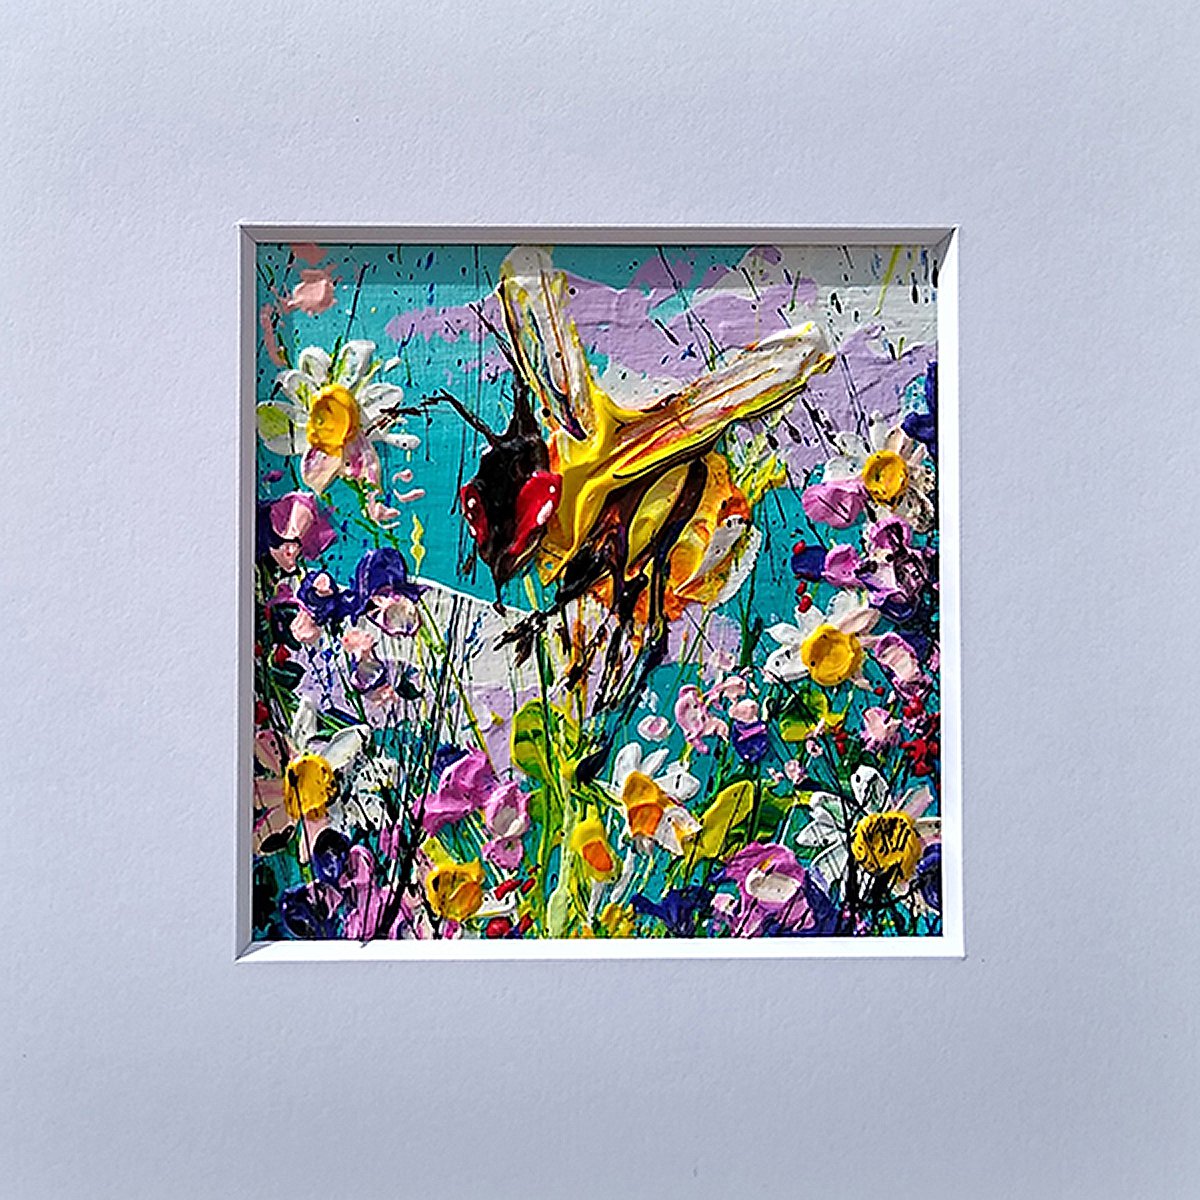 Small painting - Bumblebee #4 by Andrew Alan Johnson